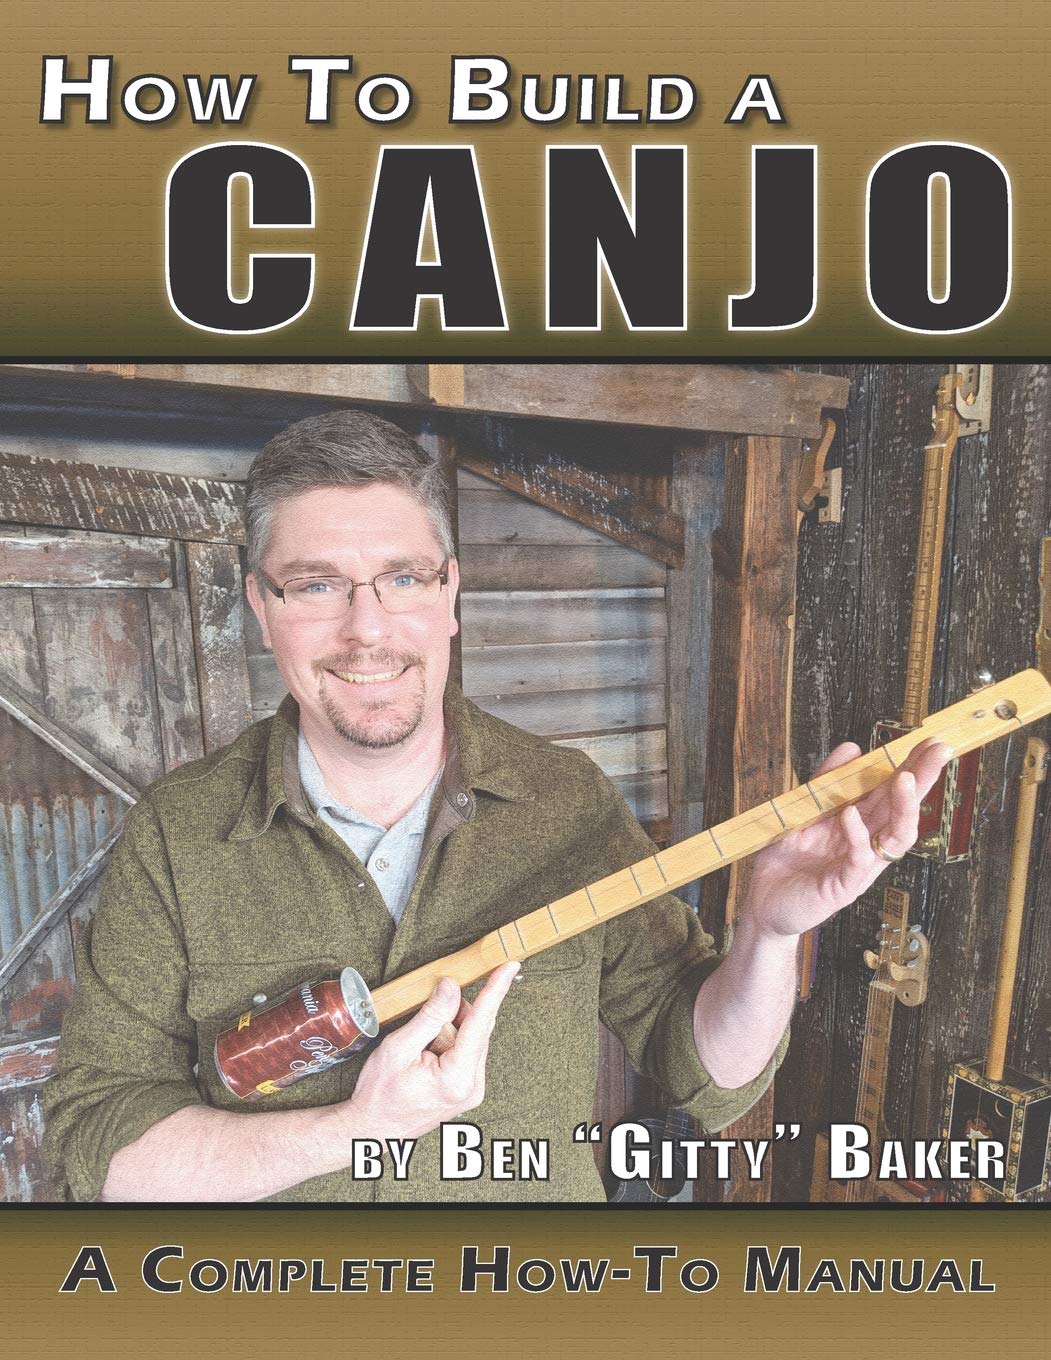 How to Build a Canjo - 120-page How-To Manual by Ben "Gitty" Baker